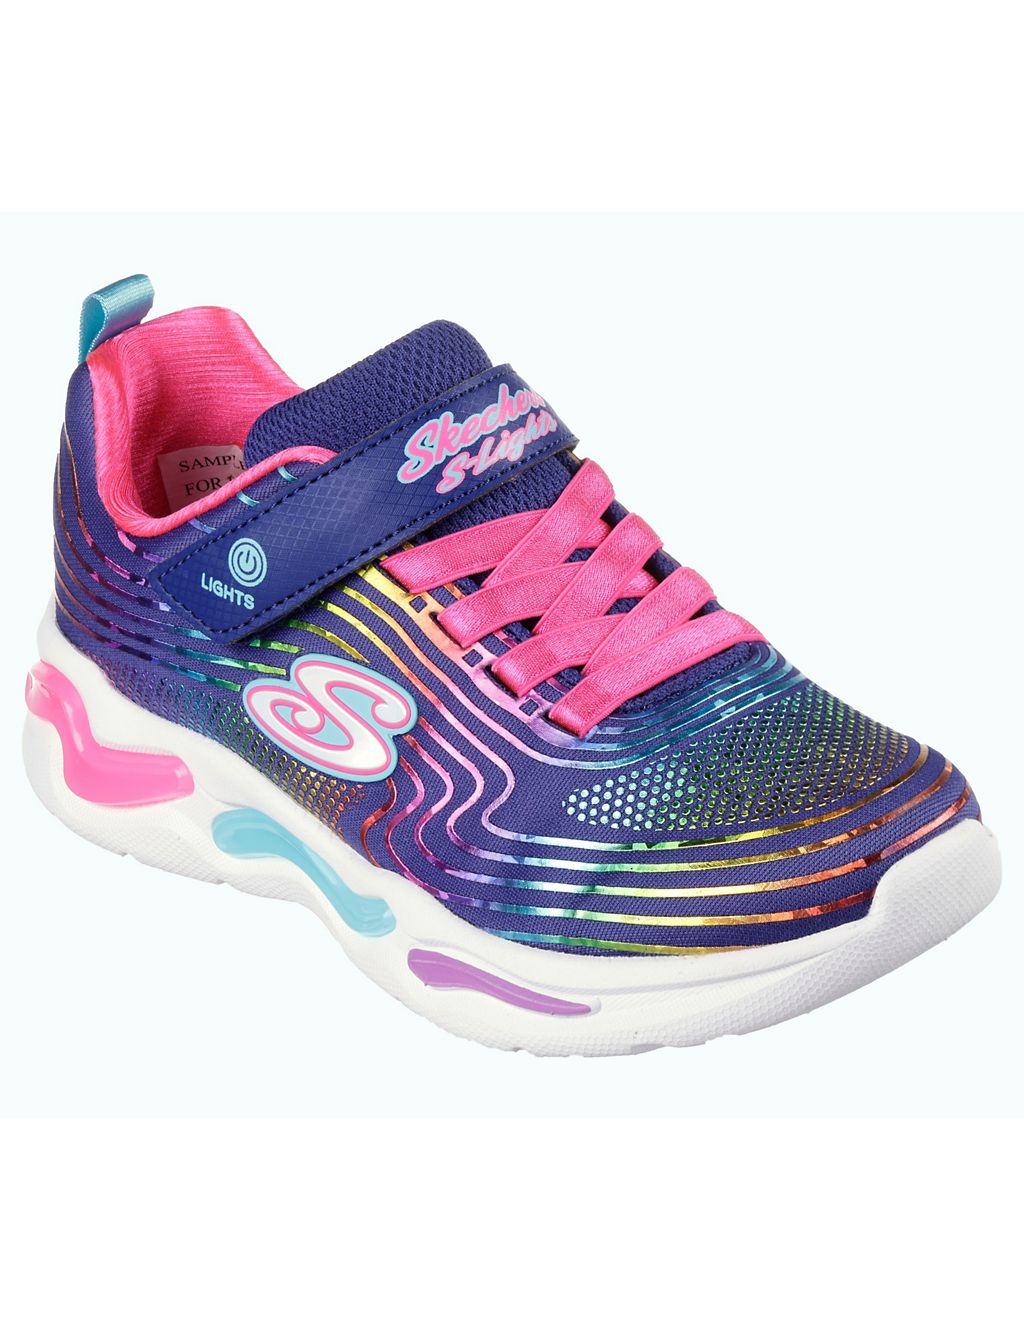 Rainbow Light Up Trainers (9.5 Small - 3 Large) 1 of 6